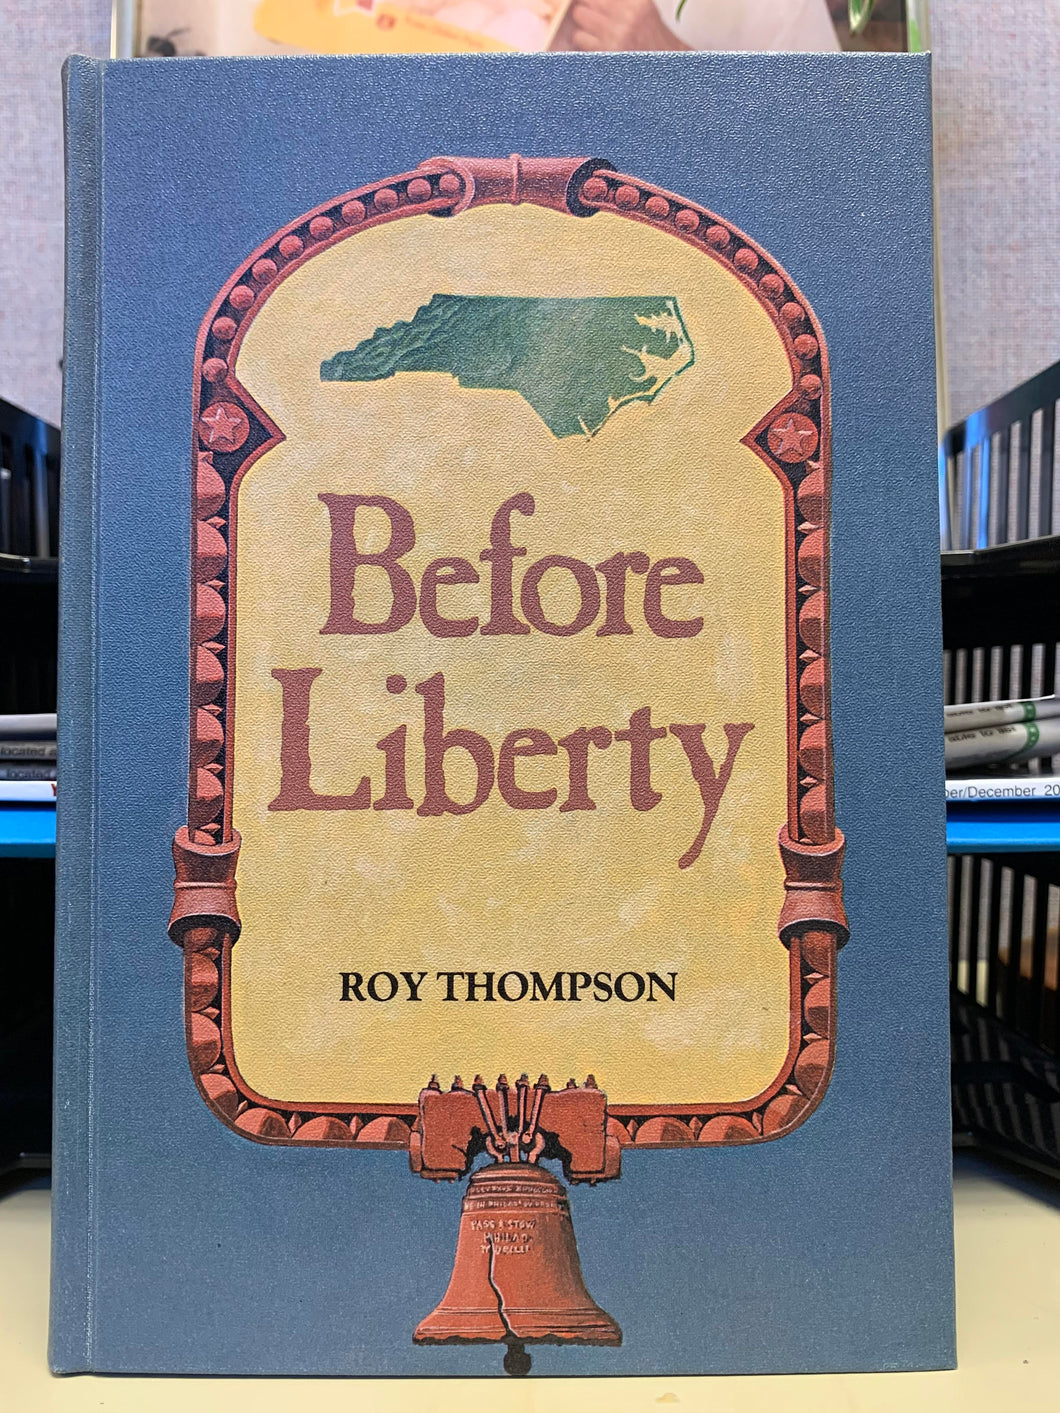 Before Liberty by Roy Thompson